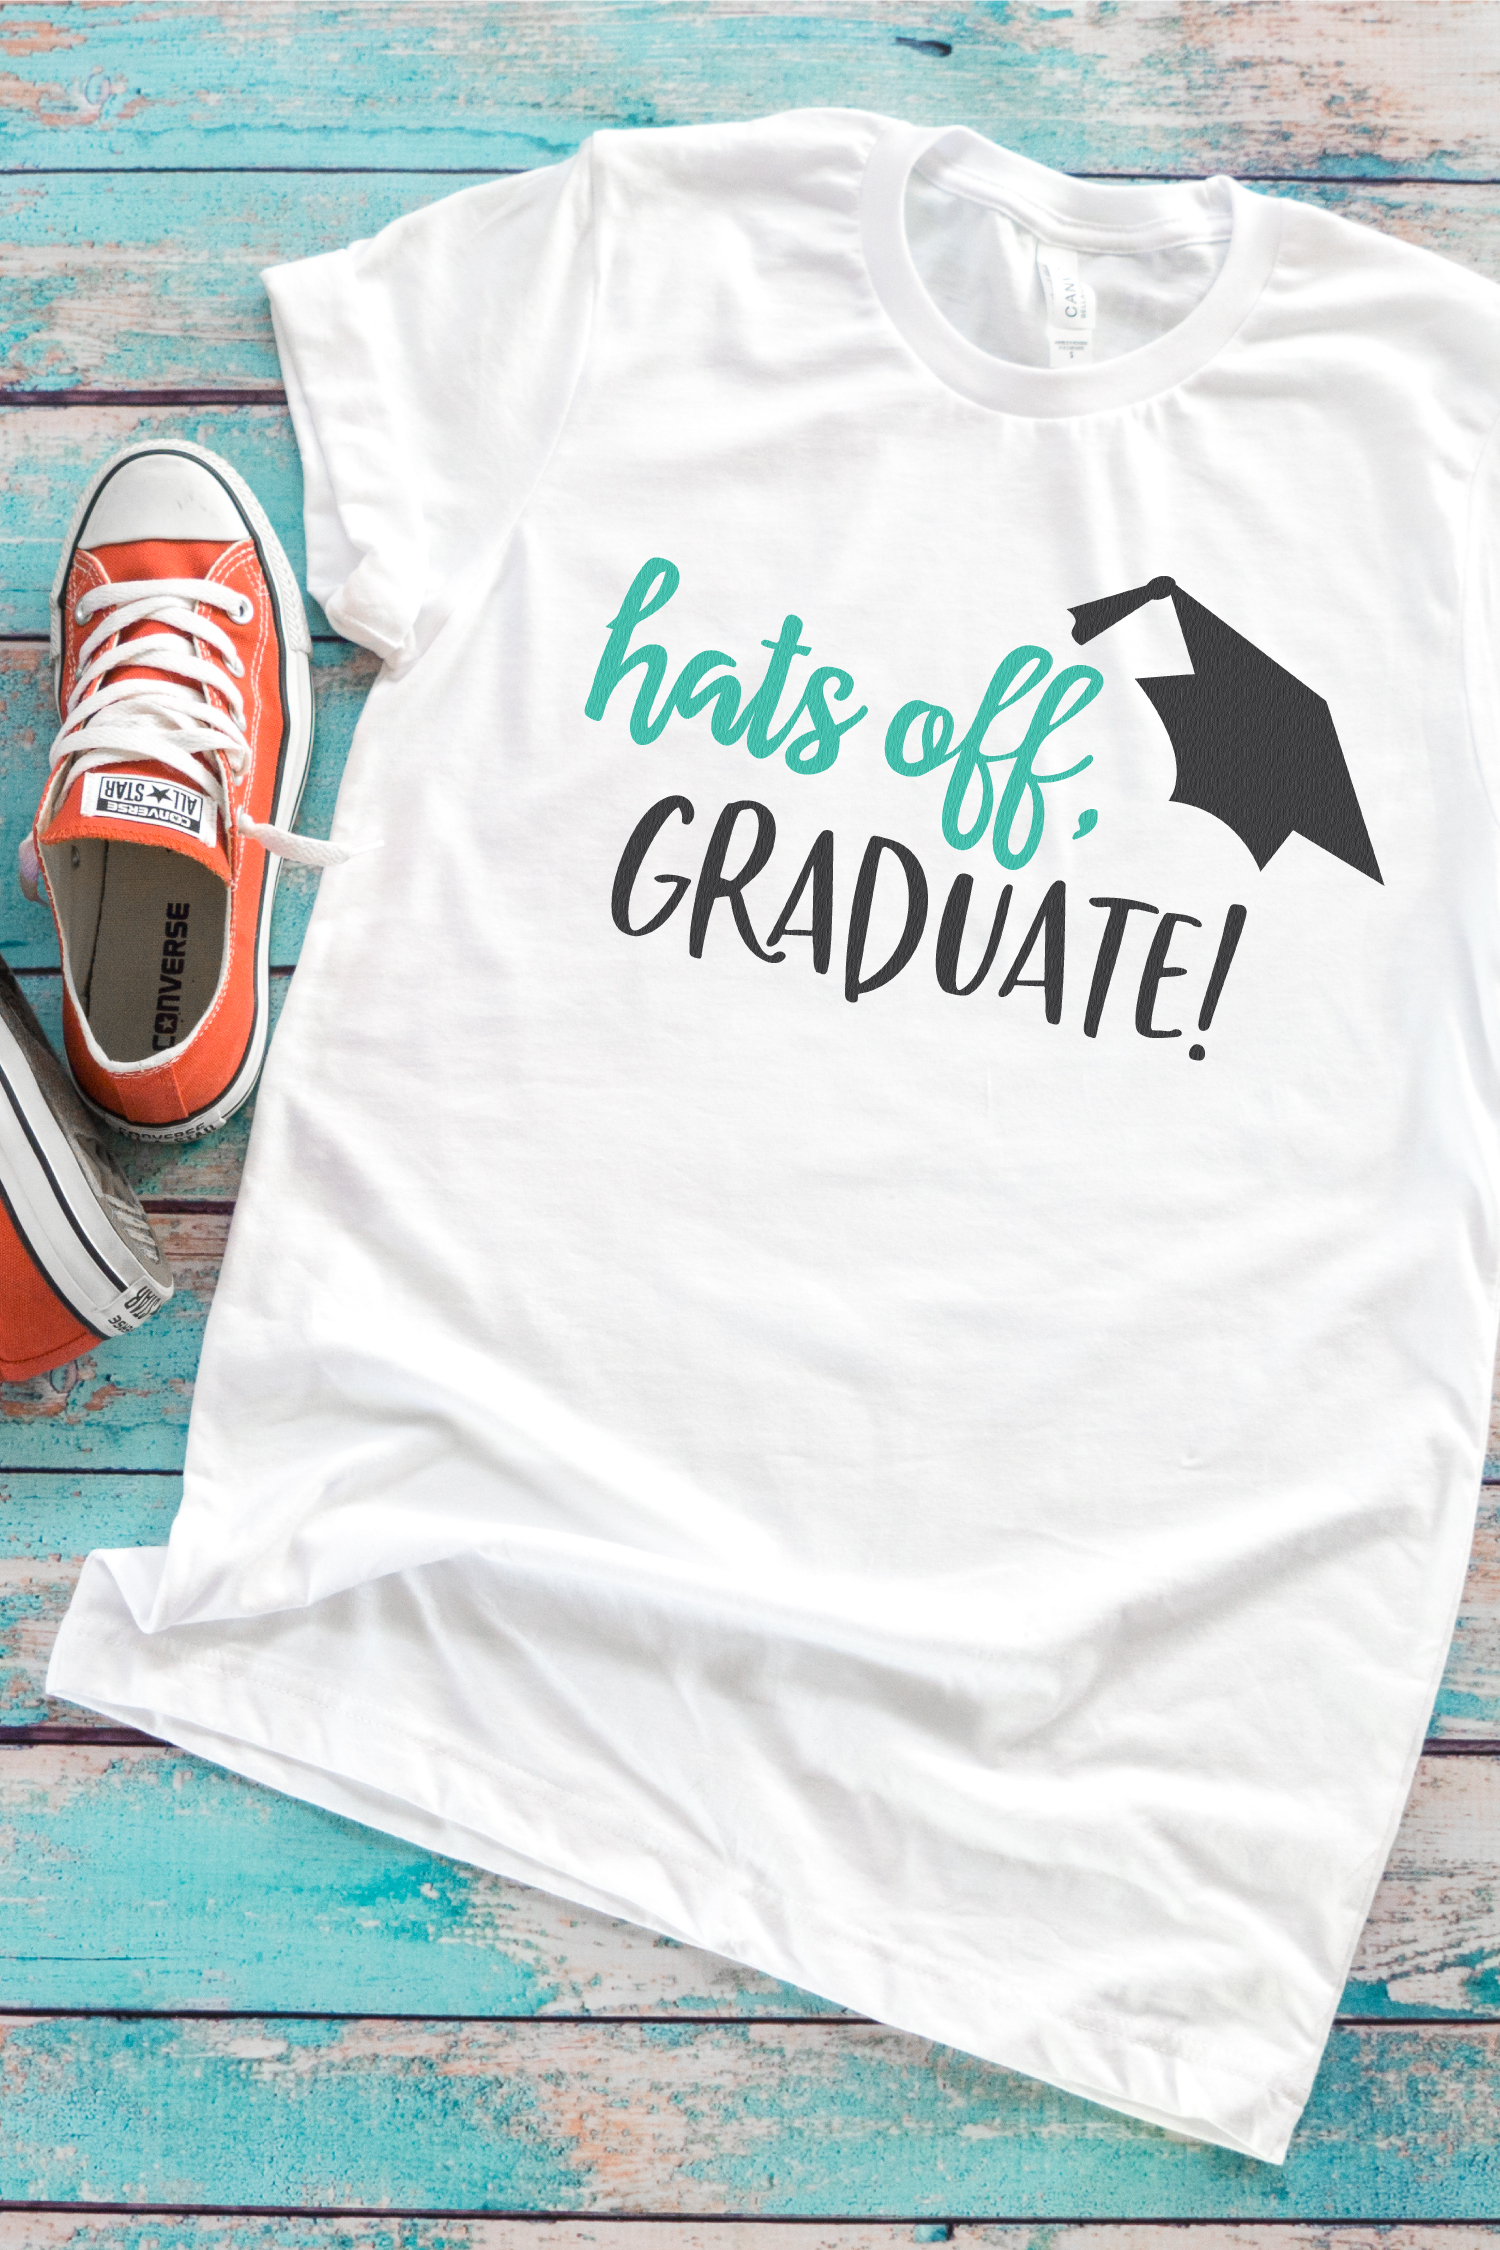 Download Funny Graduation Cards - Eight Free Printable Cards!